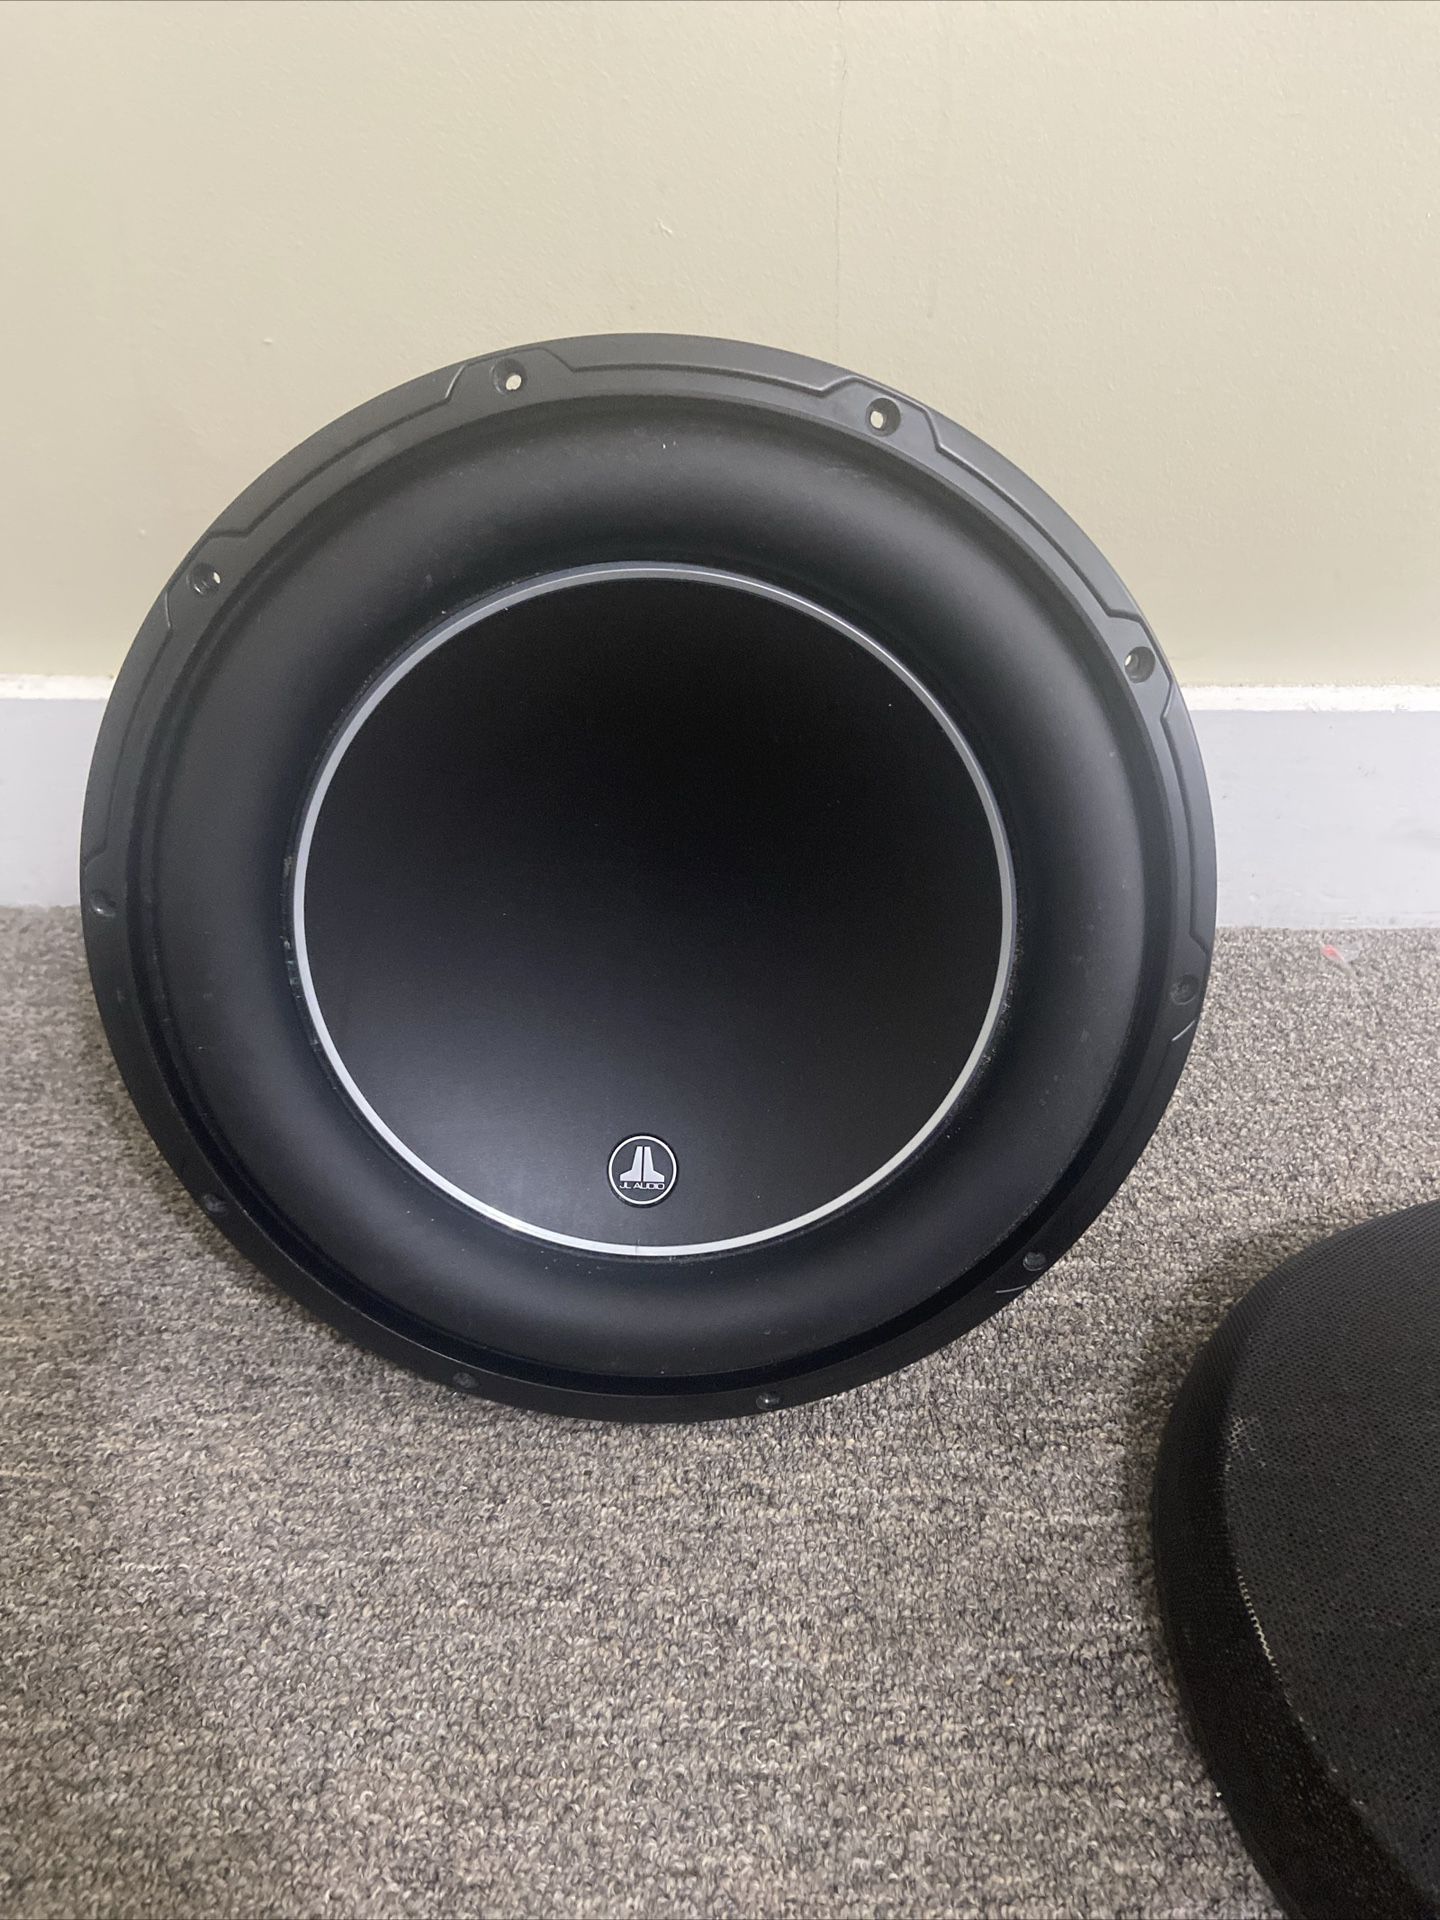 Jl Audio 12 W6 Perfect Working Condition Have receipt